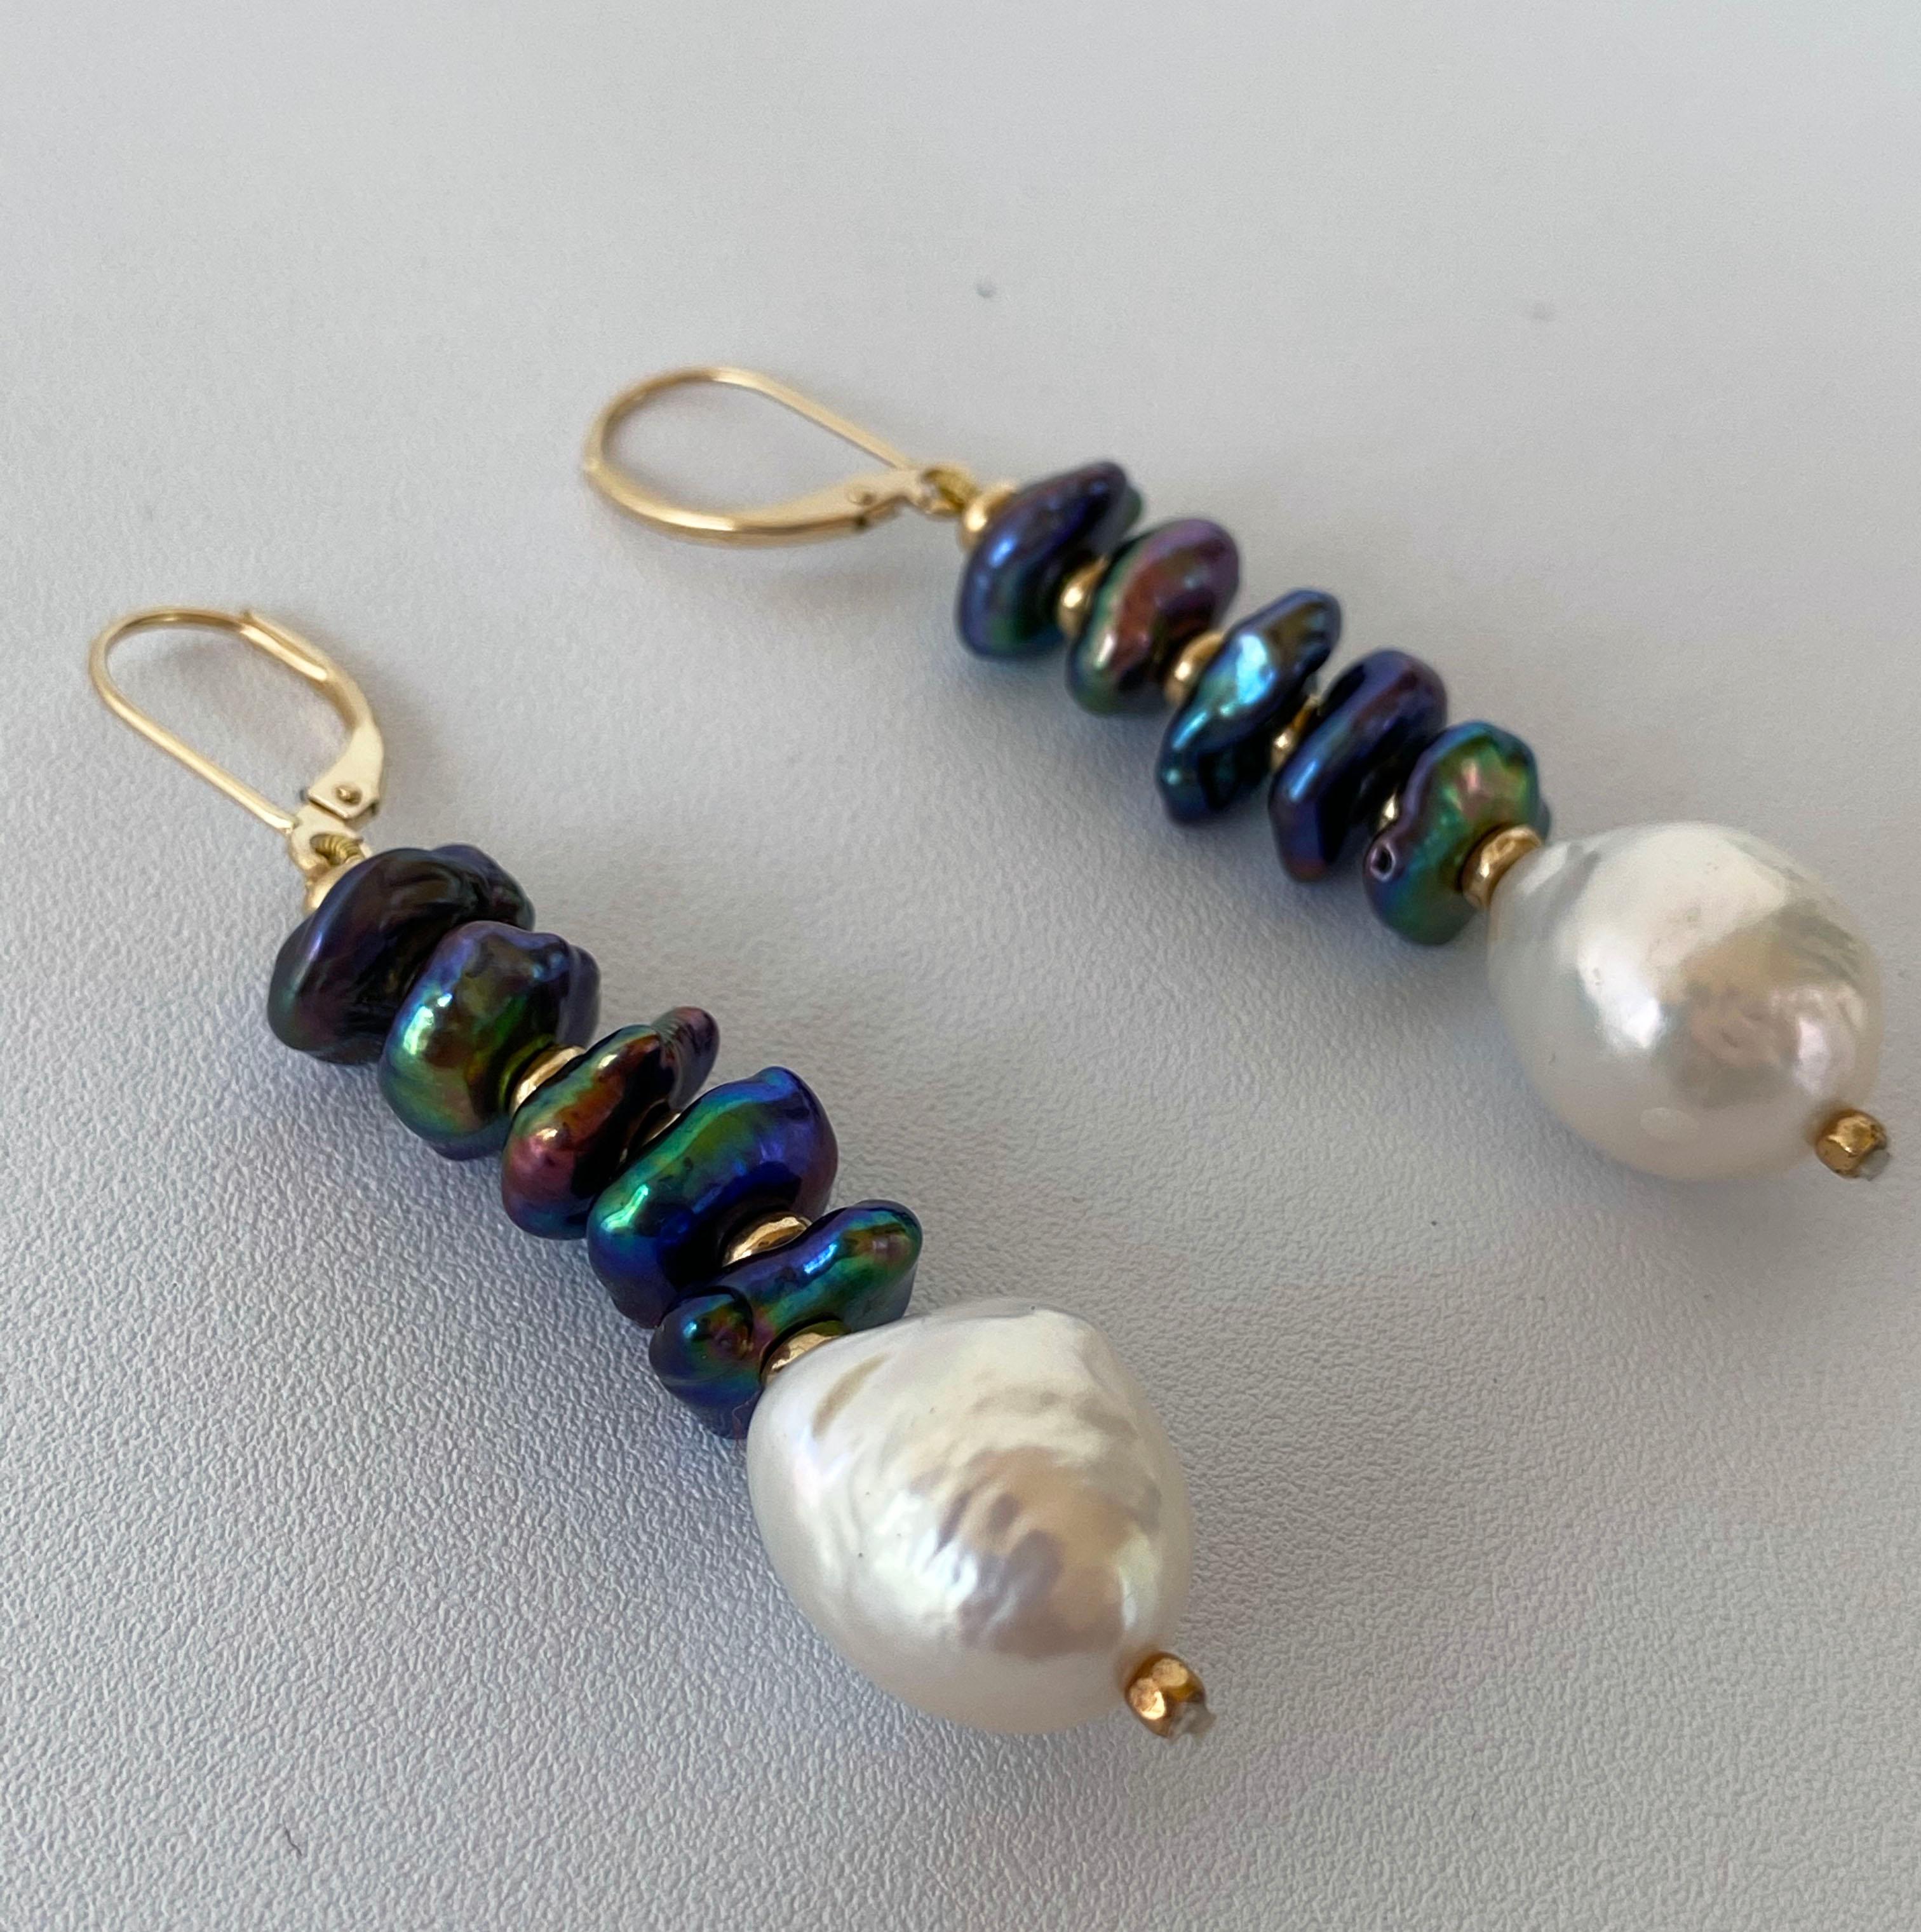 These stunning earrings feature bright iridescent Black oil spill / peacock Pearls separated by contrasting Gold plated Roundales. The bright contrast between the textured Black Pearls and Gold is perfectly balanced with a large smooth Baroque White